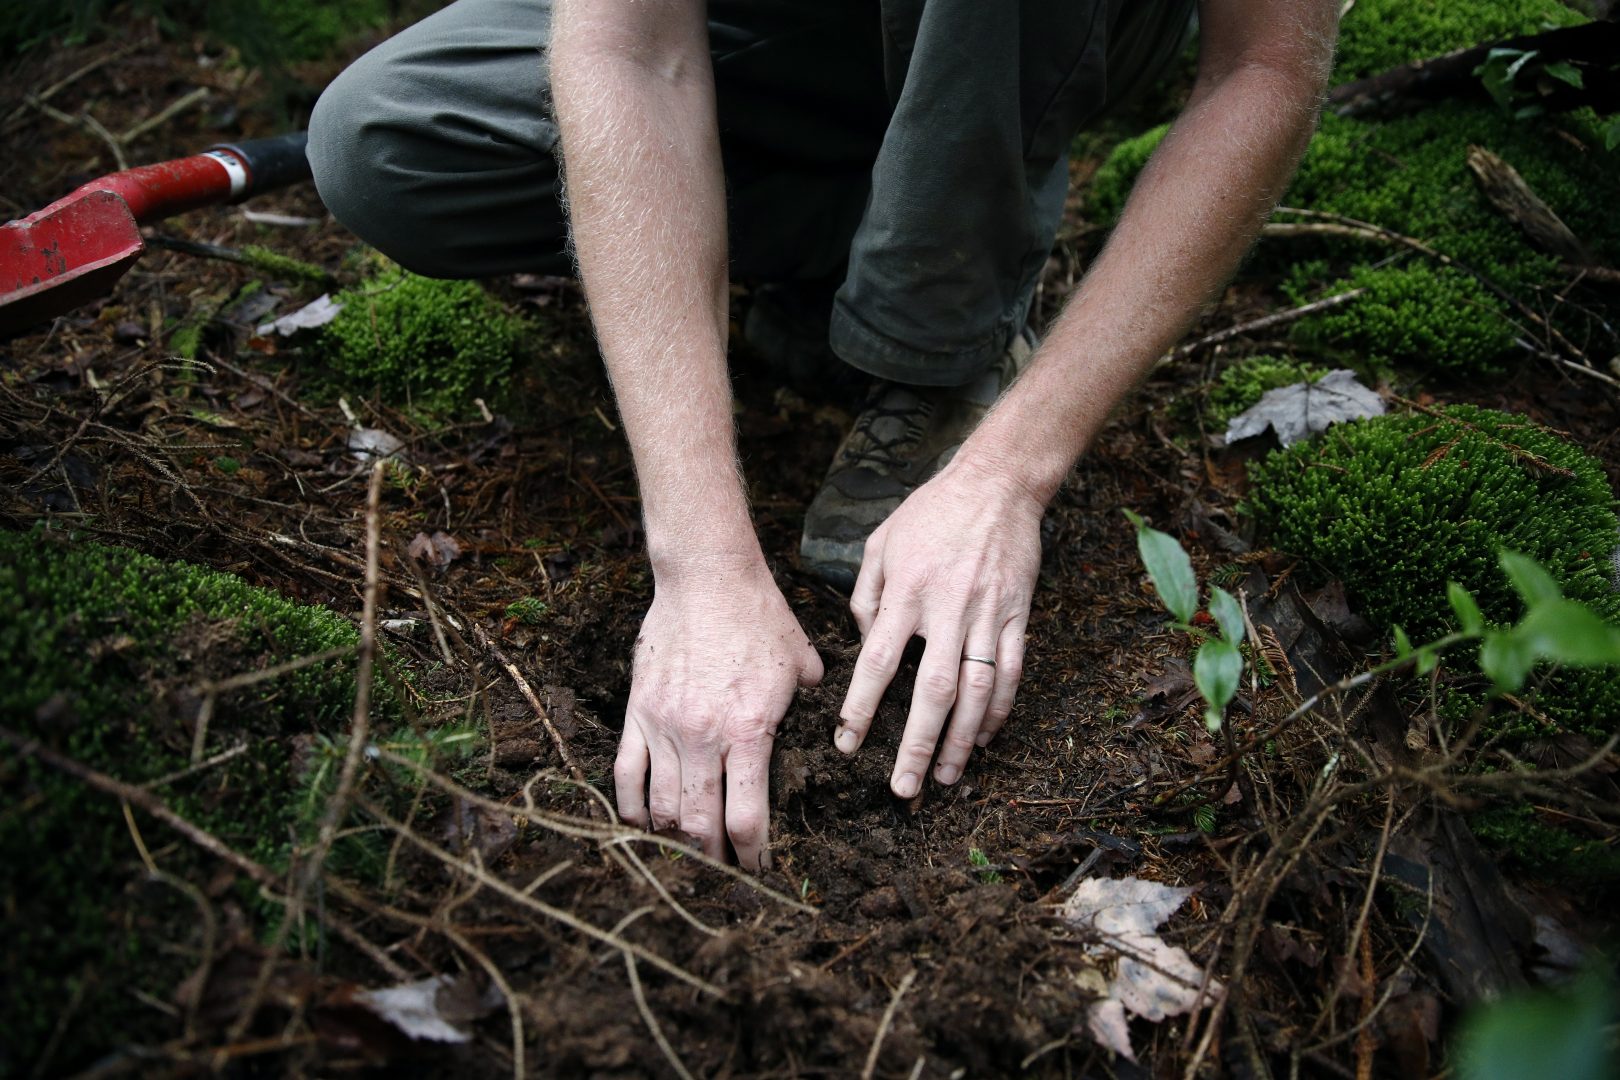 Michael French, director of operations for the nonprofit Green Forests Work, pulls up soil in an area of virgin spruce forest in Monongahela National Forest, W.Va., on Aug. 27, 2019. French and colleagues at Green Forests Work are collaborating with the U.S. Forest Service to restore native Appalachian forests and the rare species they support.